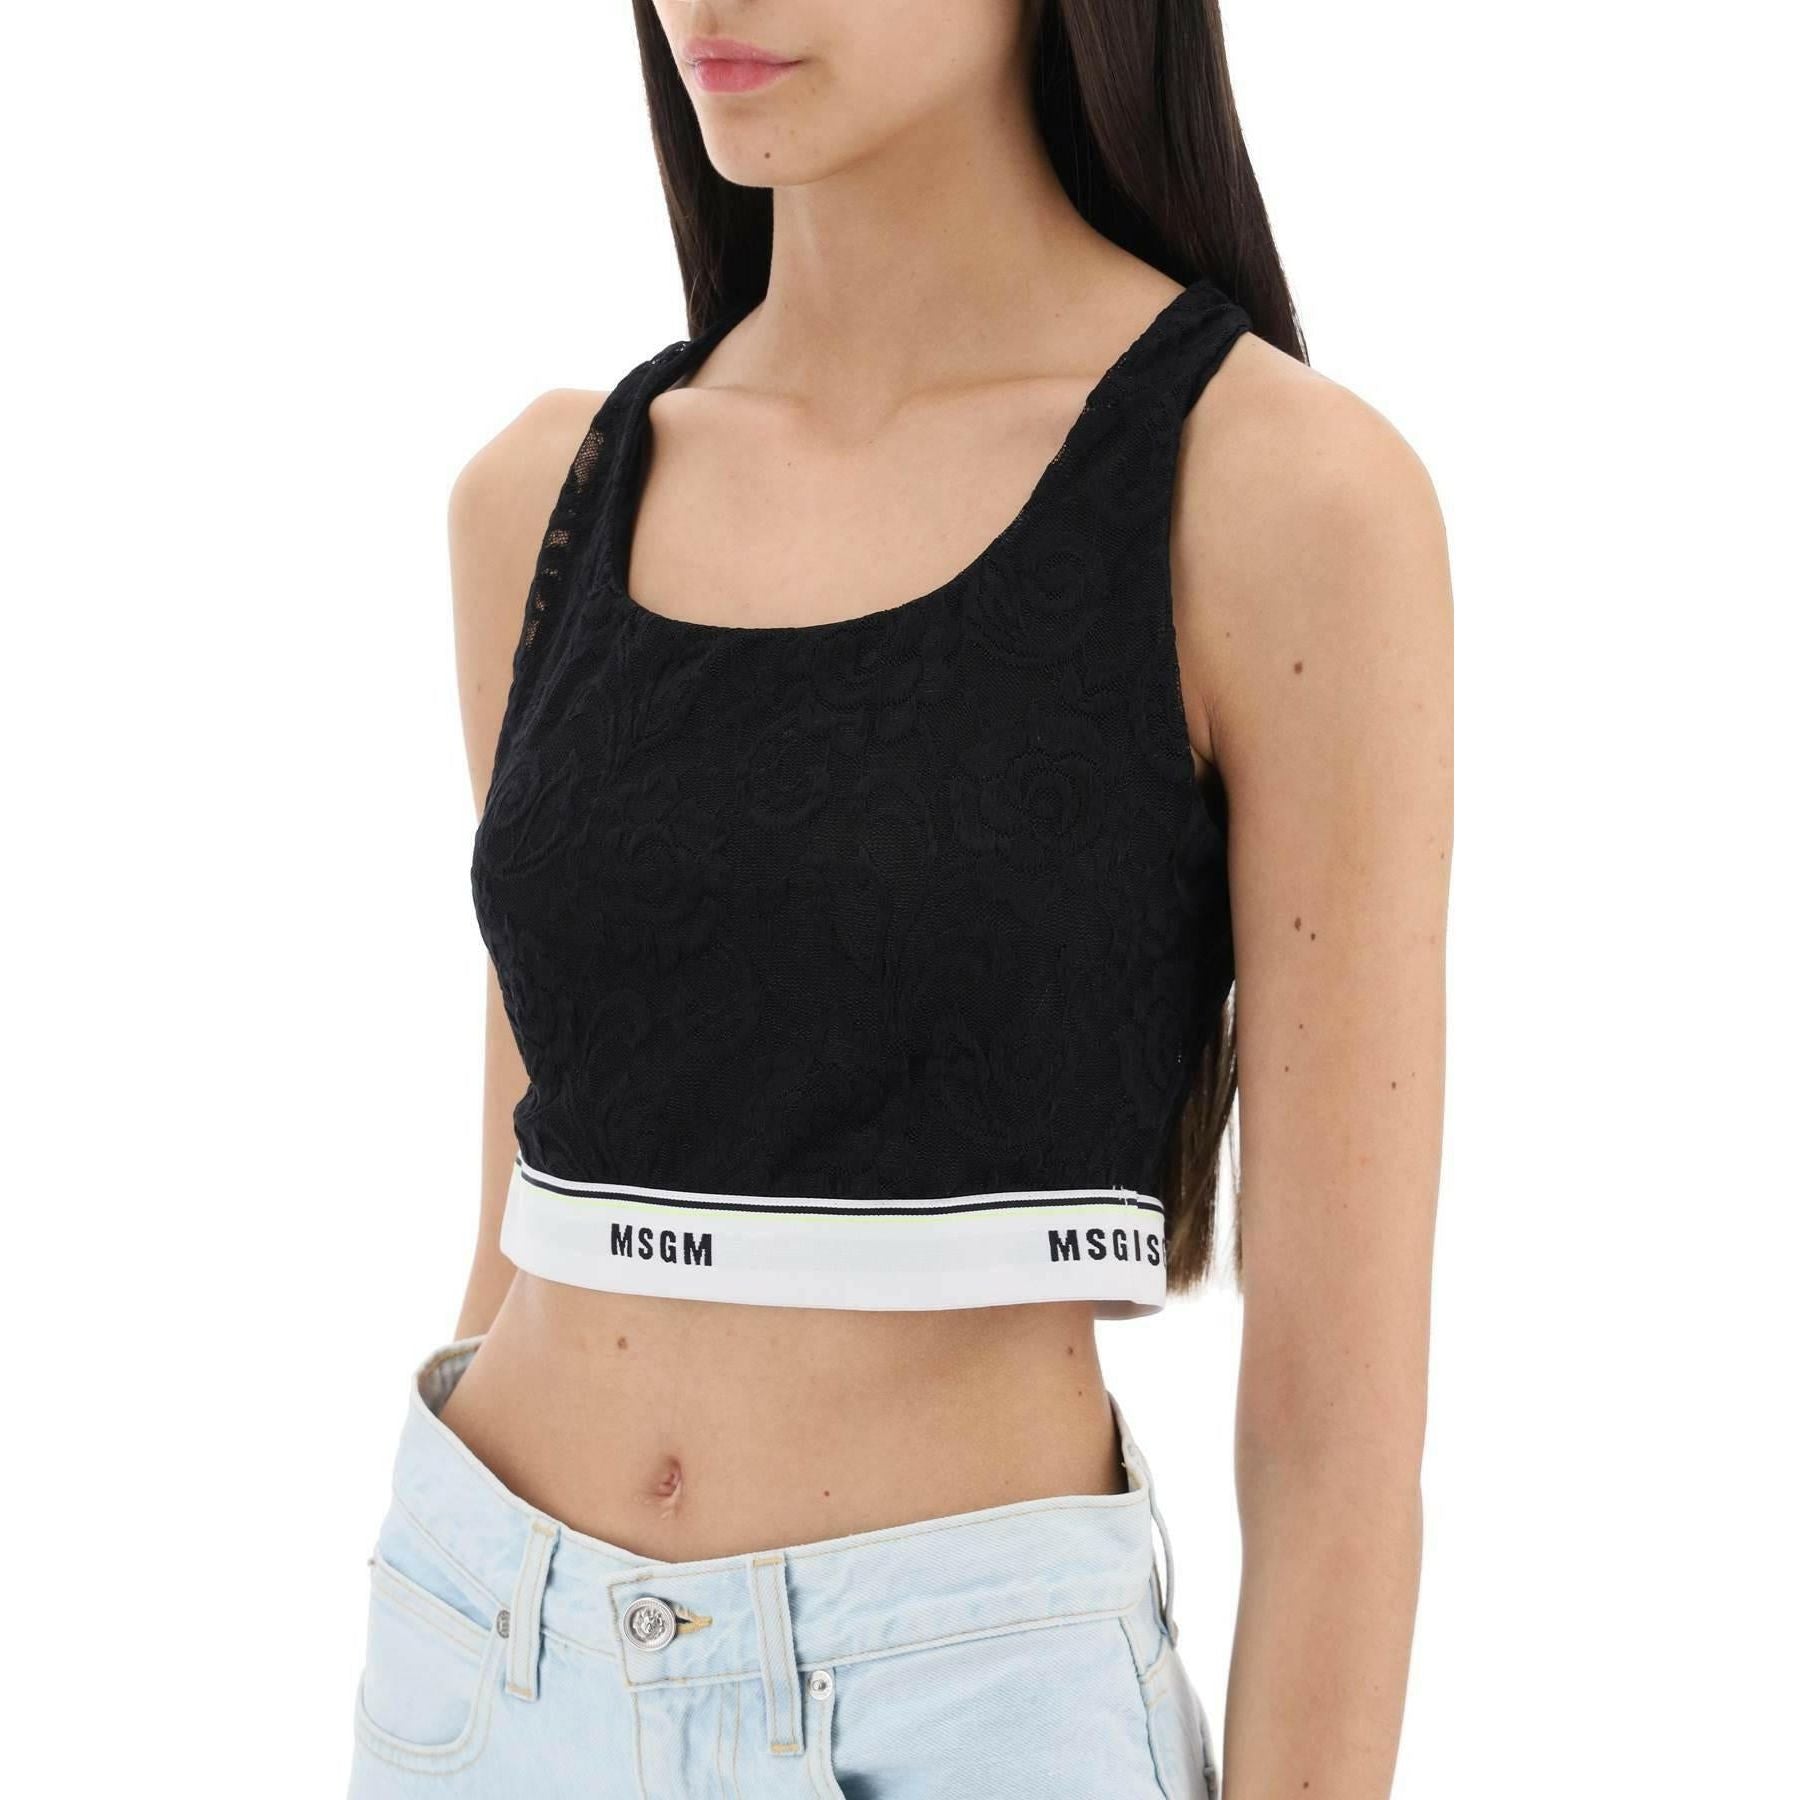 Sports Bra In Lace With Logoed Band MSGM JOHN JULIA.